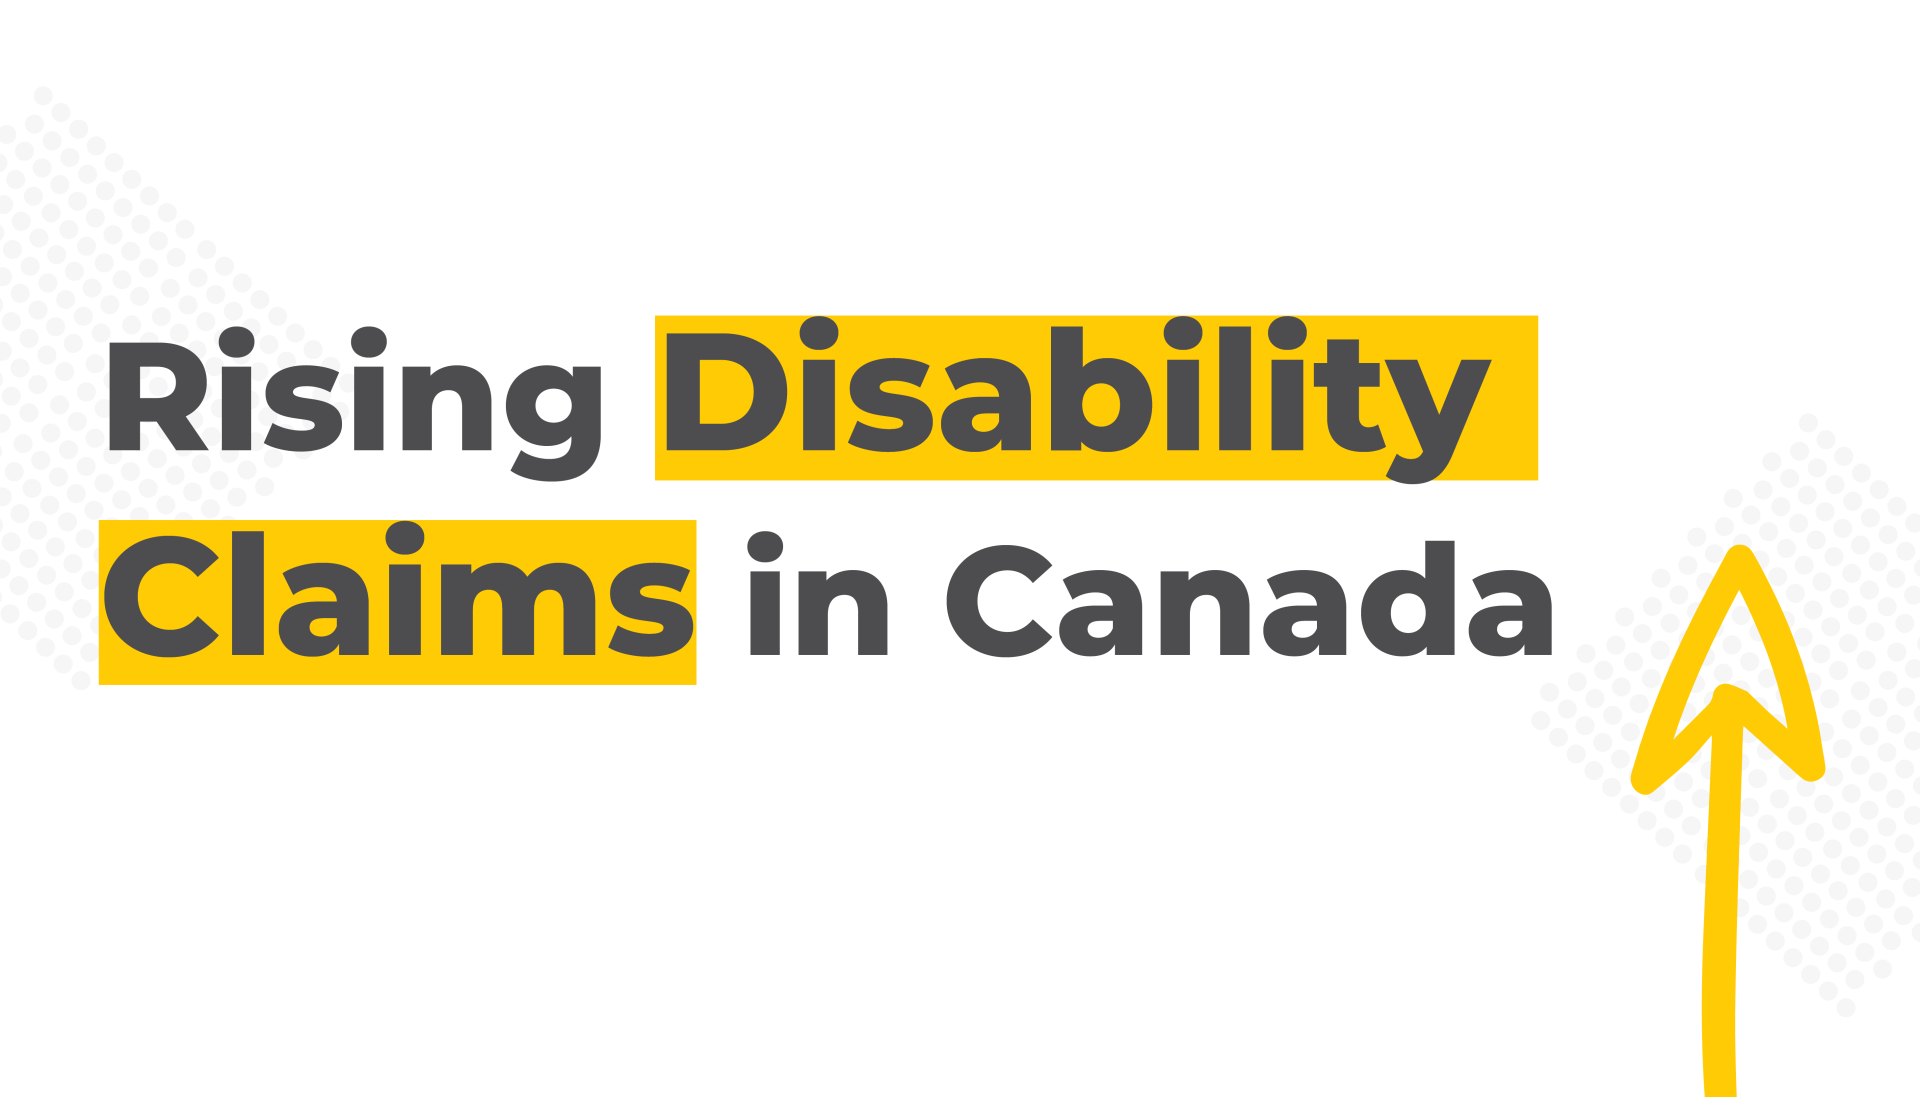 Rising Disability Claims in Canada